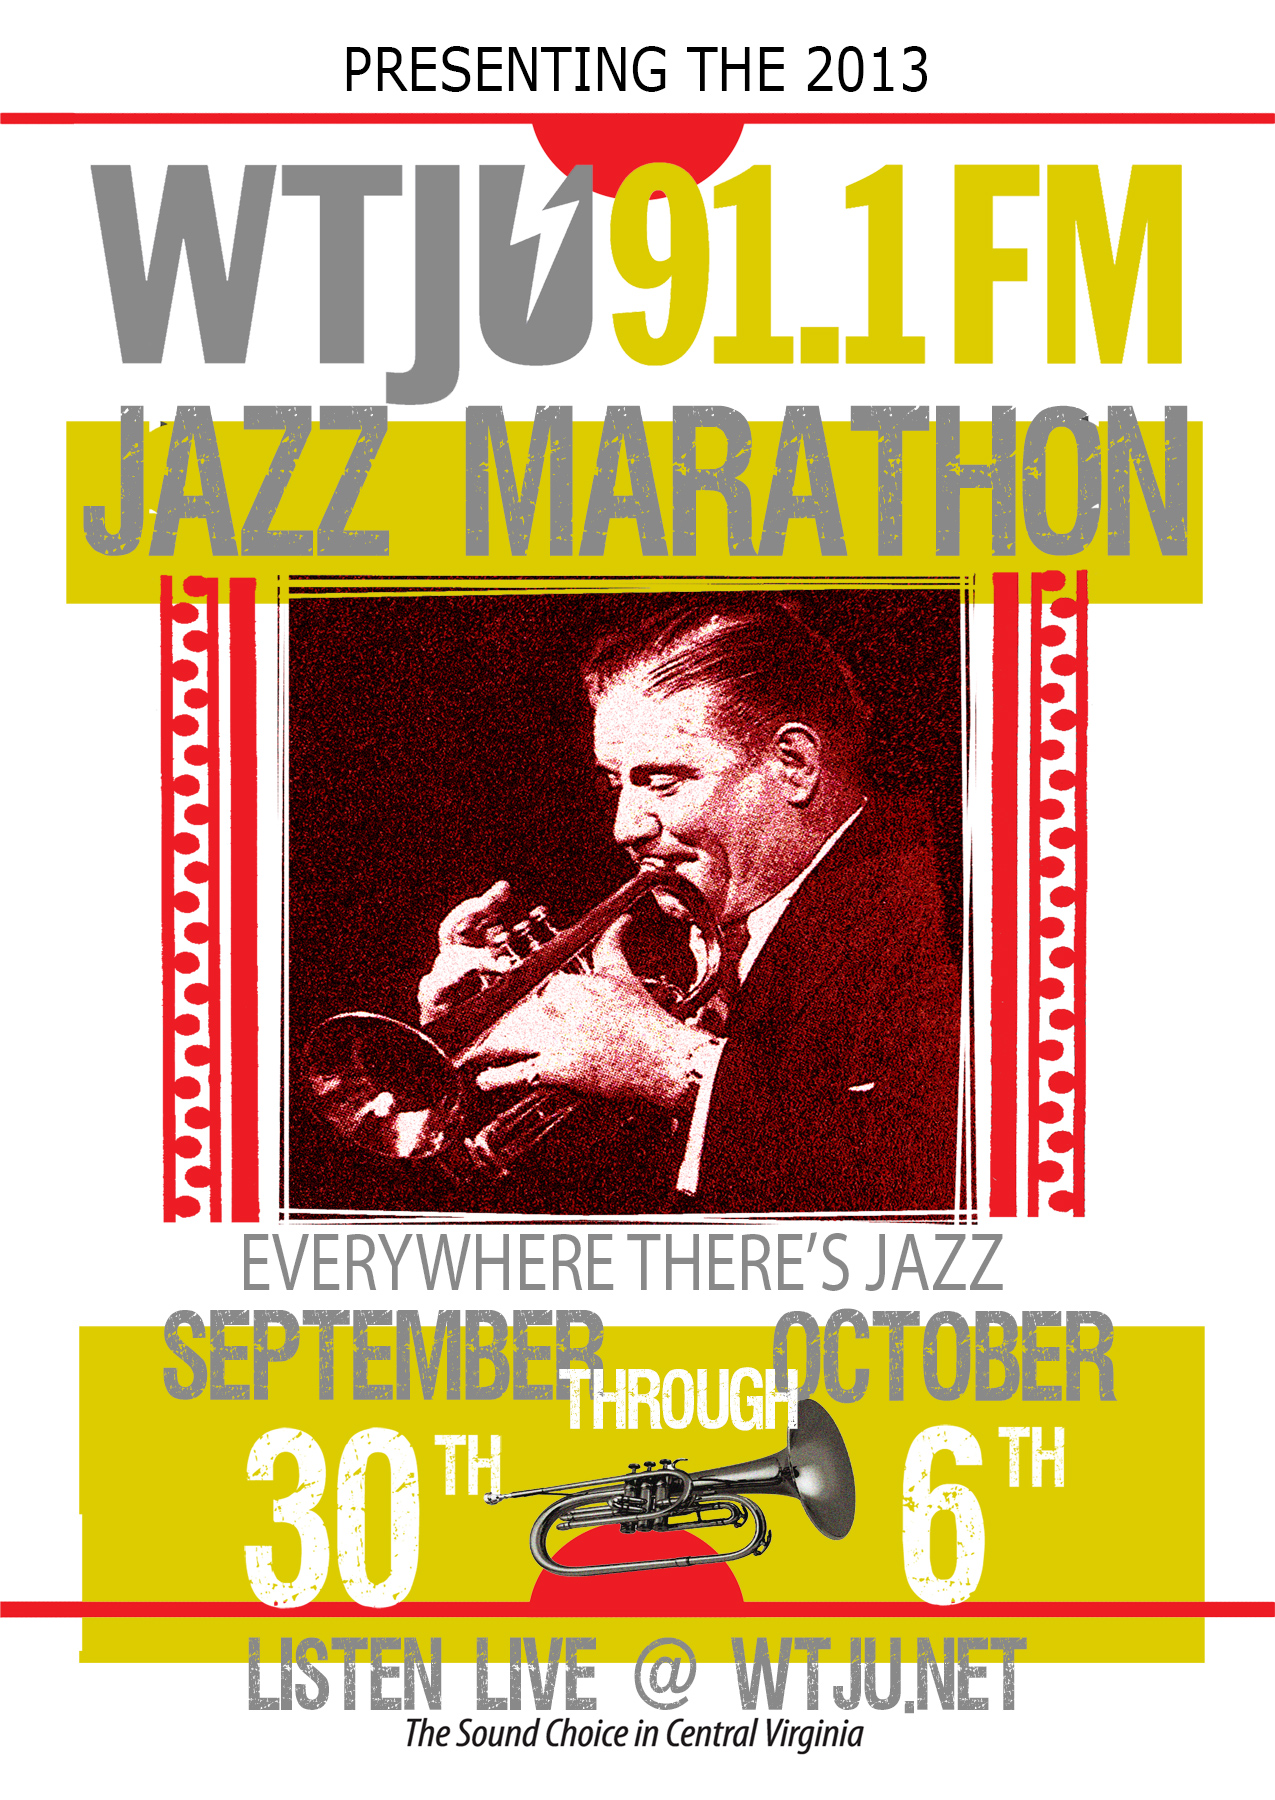 Text reads: Jazz Marathon.  Everywhere there's Jazz September 30 - October 6th.  Listen live @ wtju.net. the sound choice in central virginia